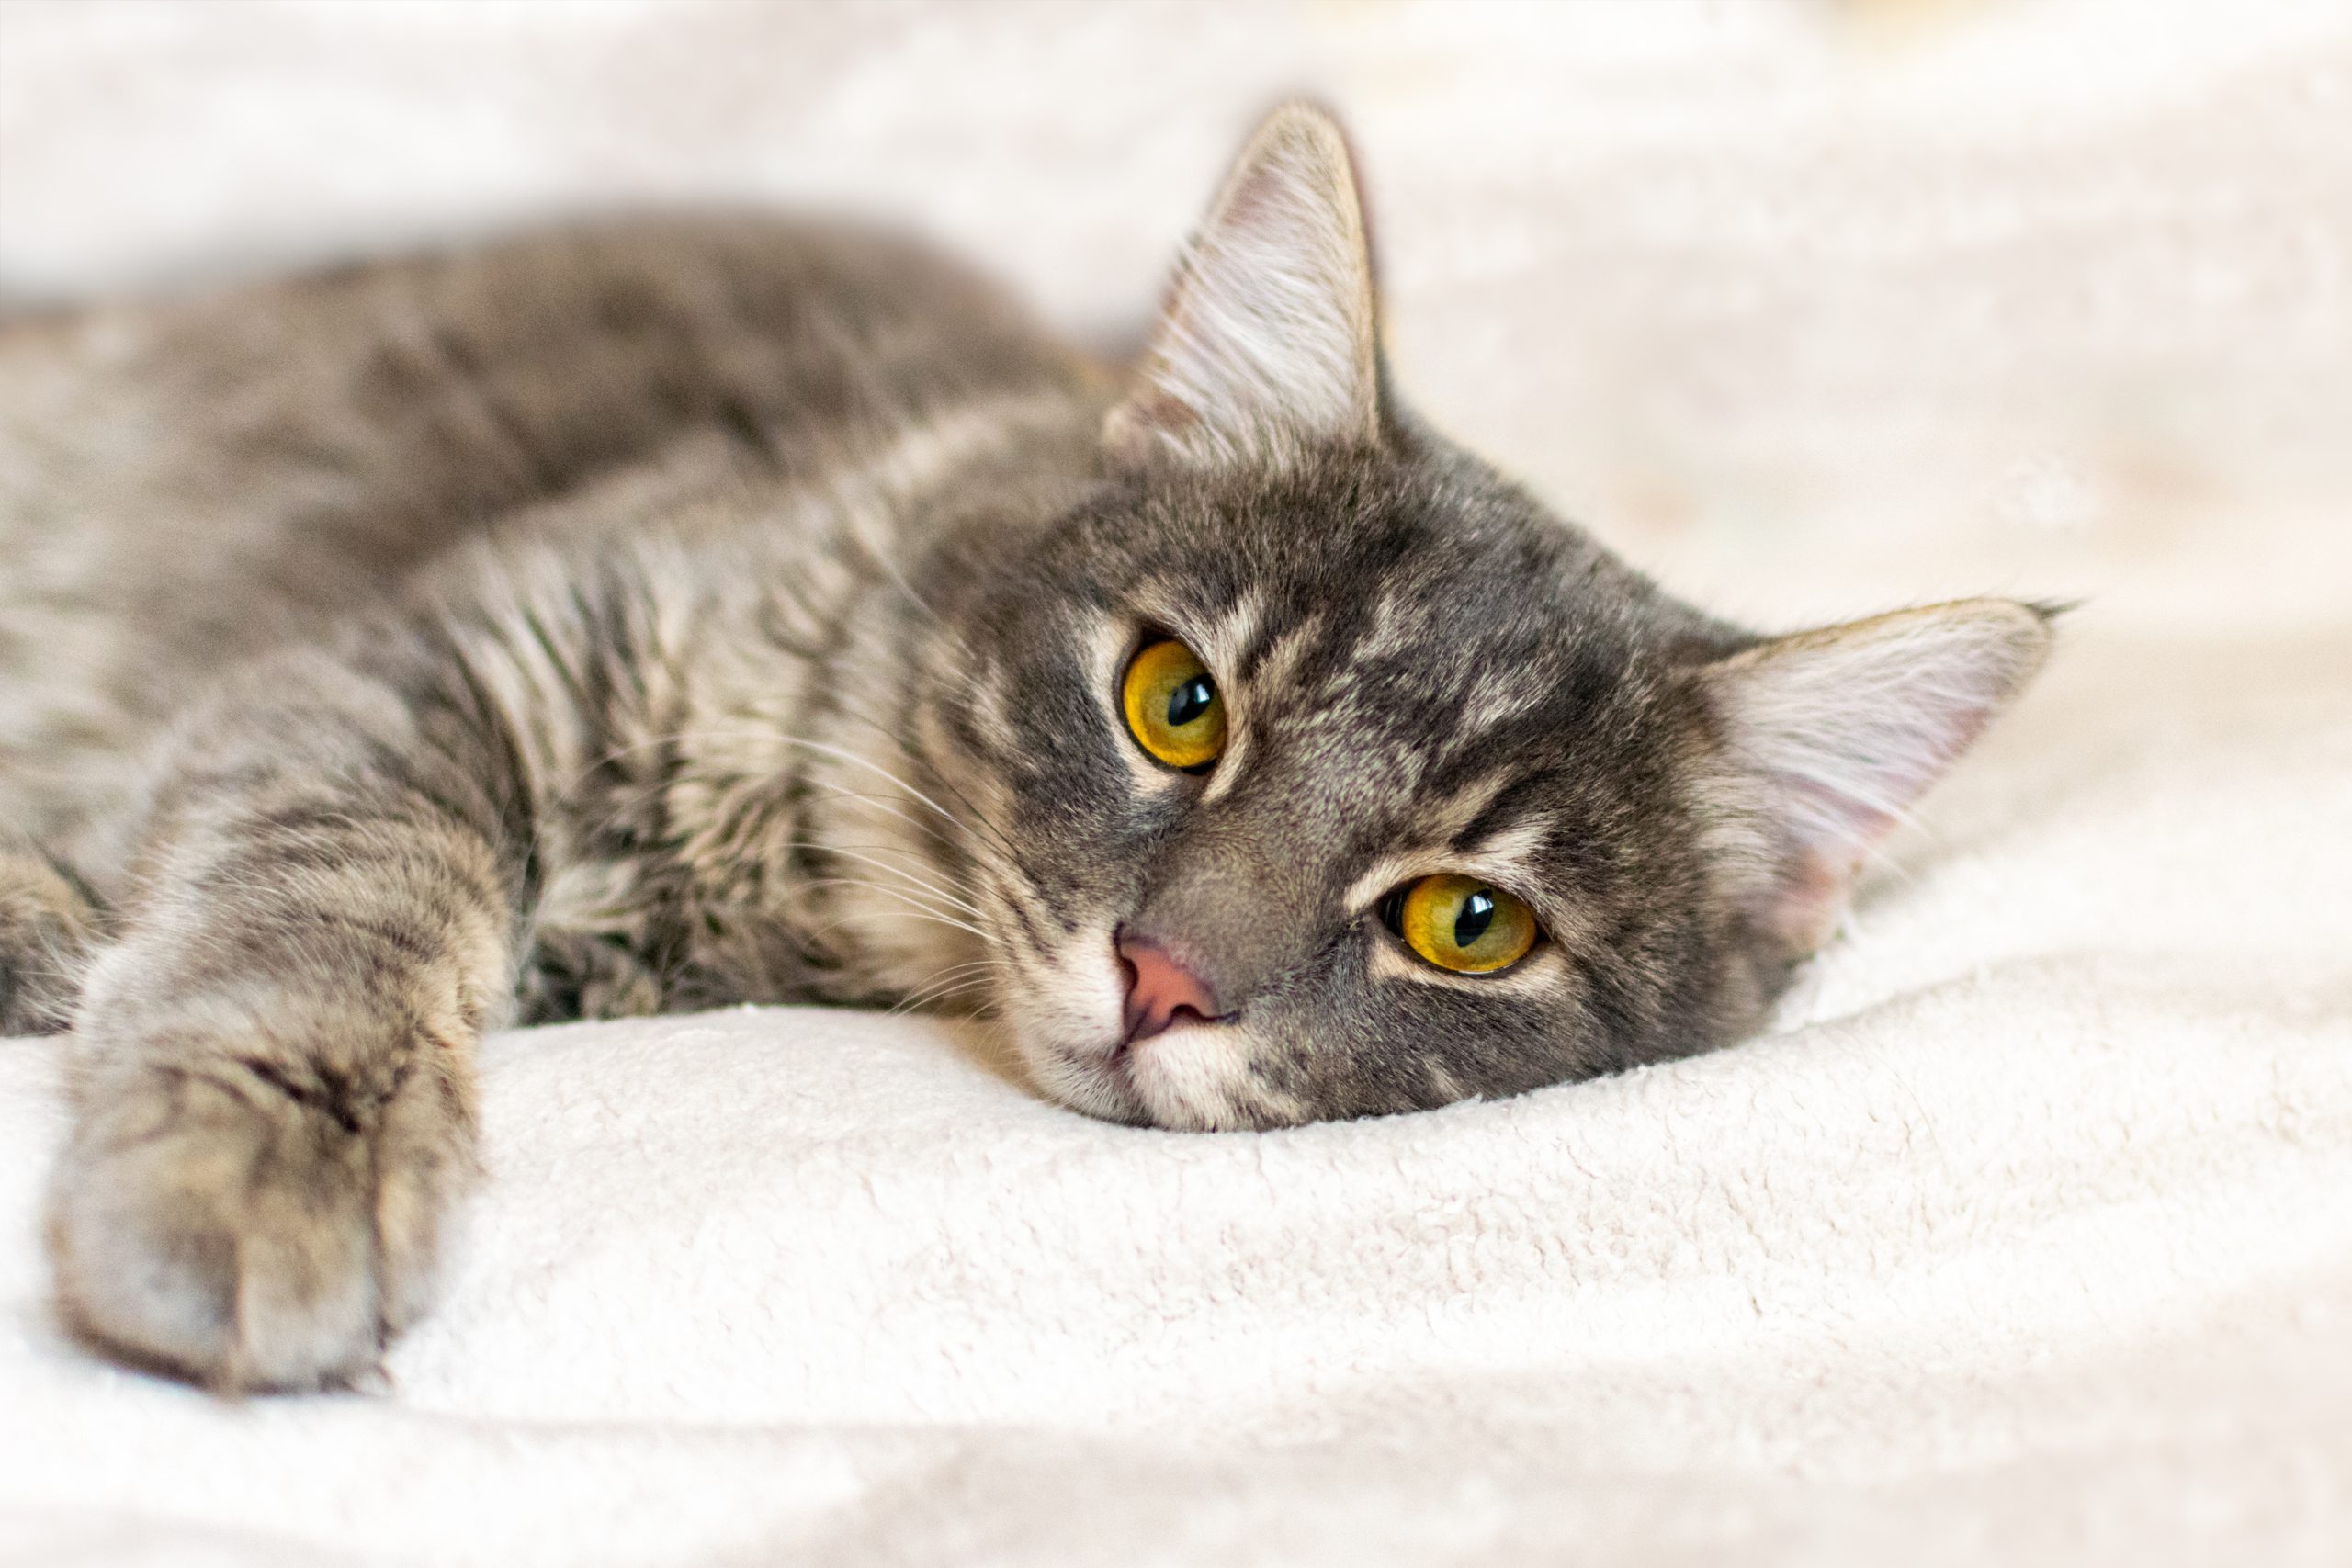 5 major signs your cat is sick (& how to afford vet visits)